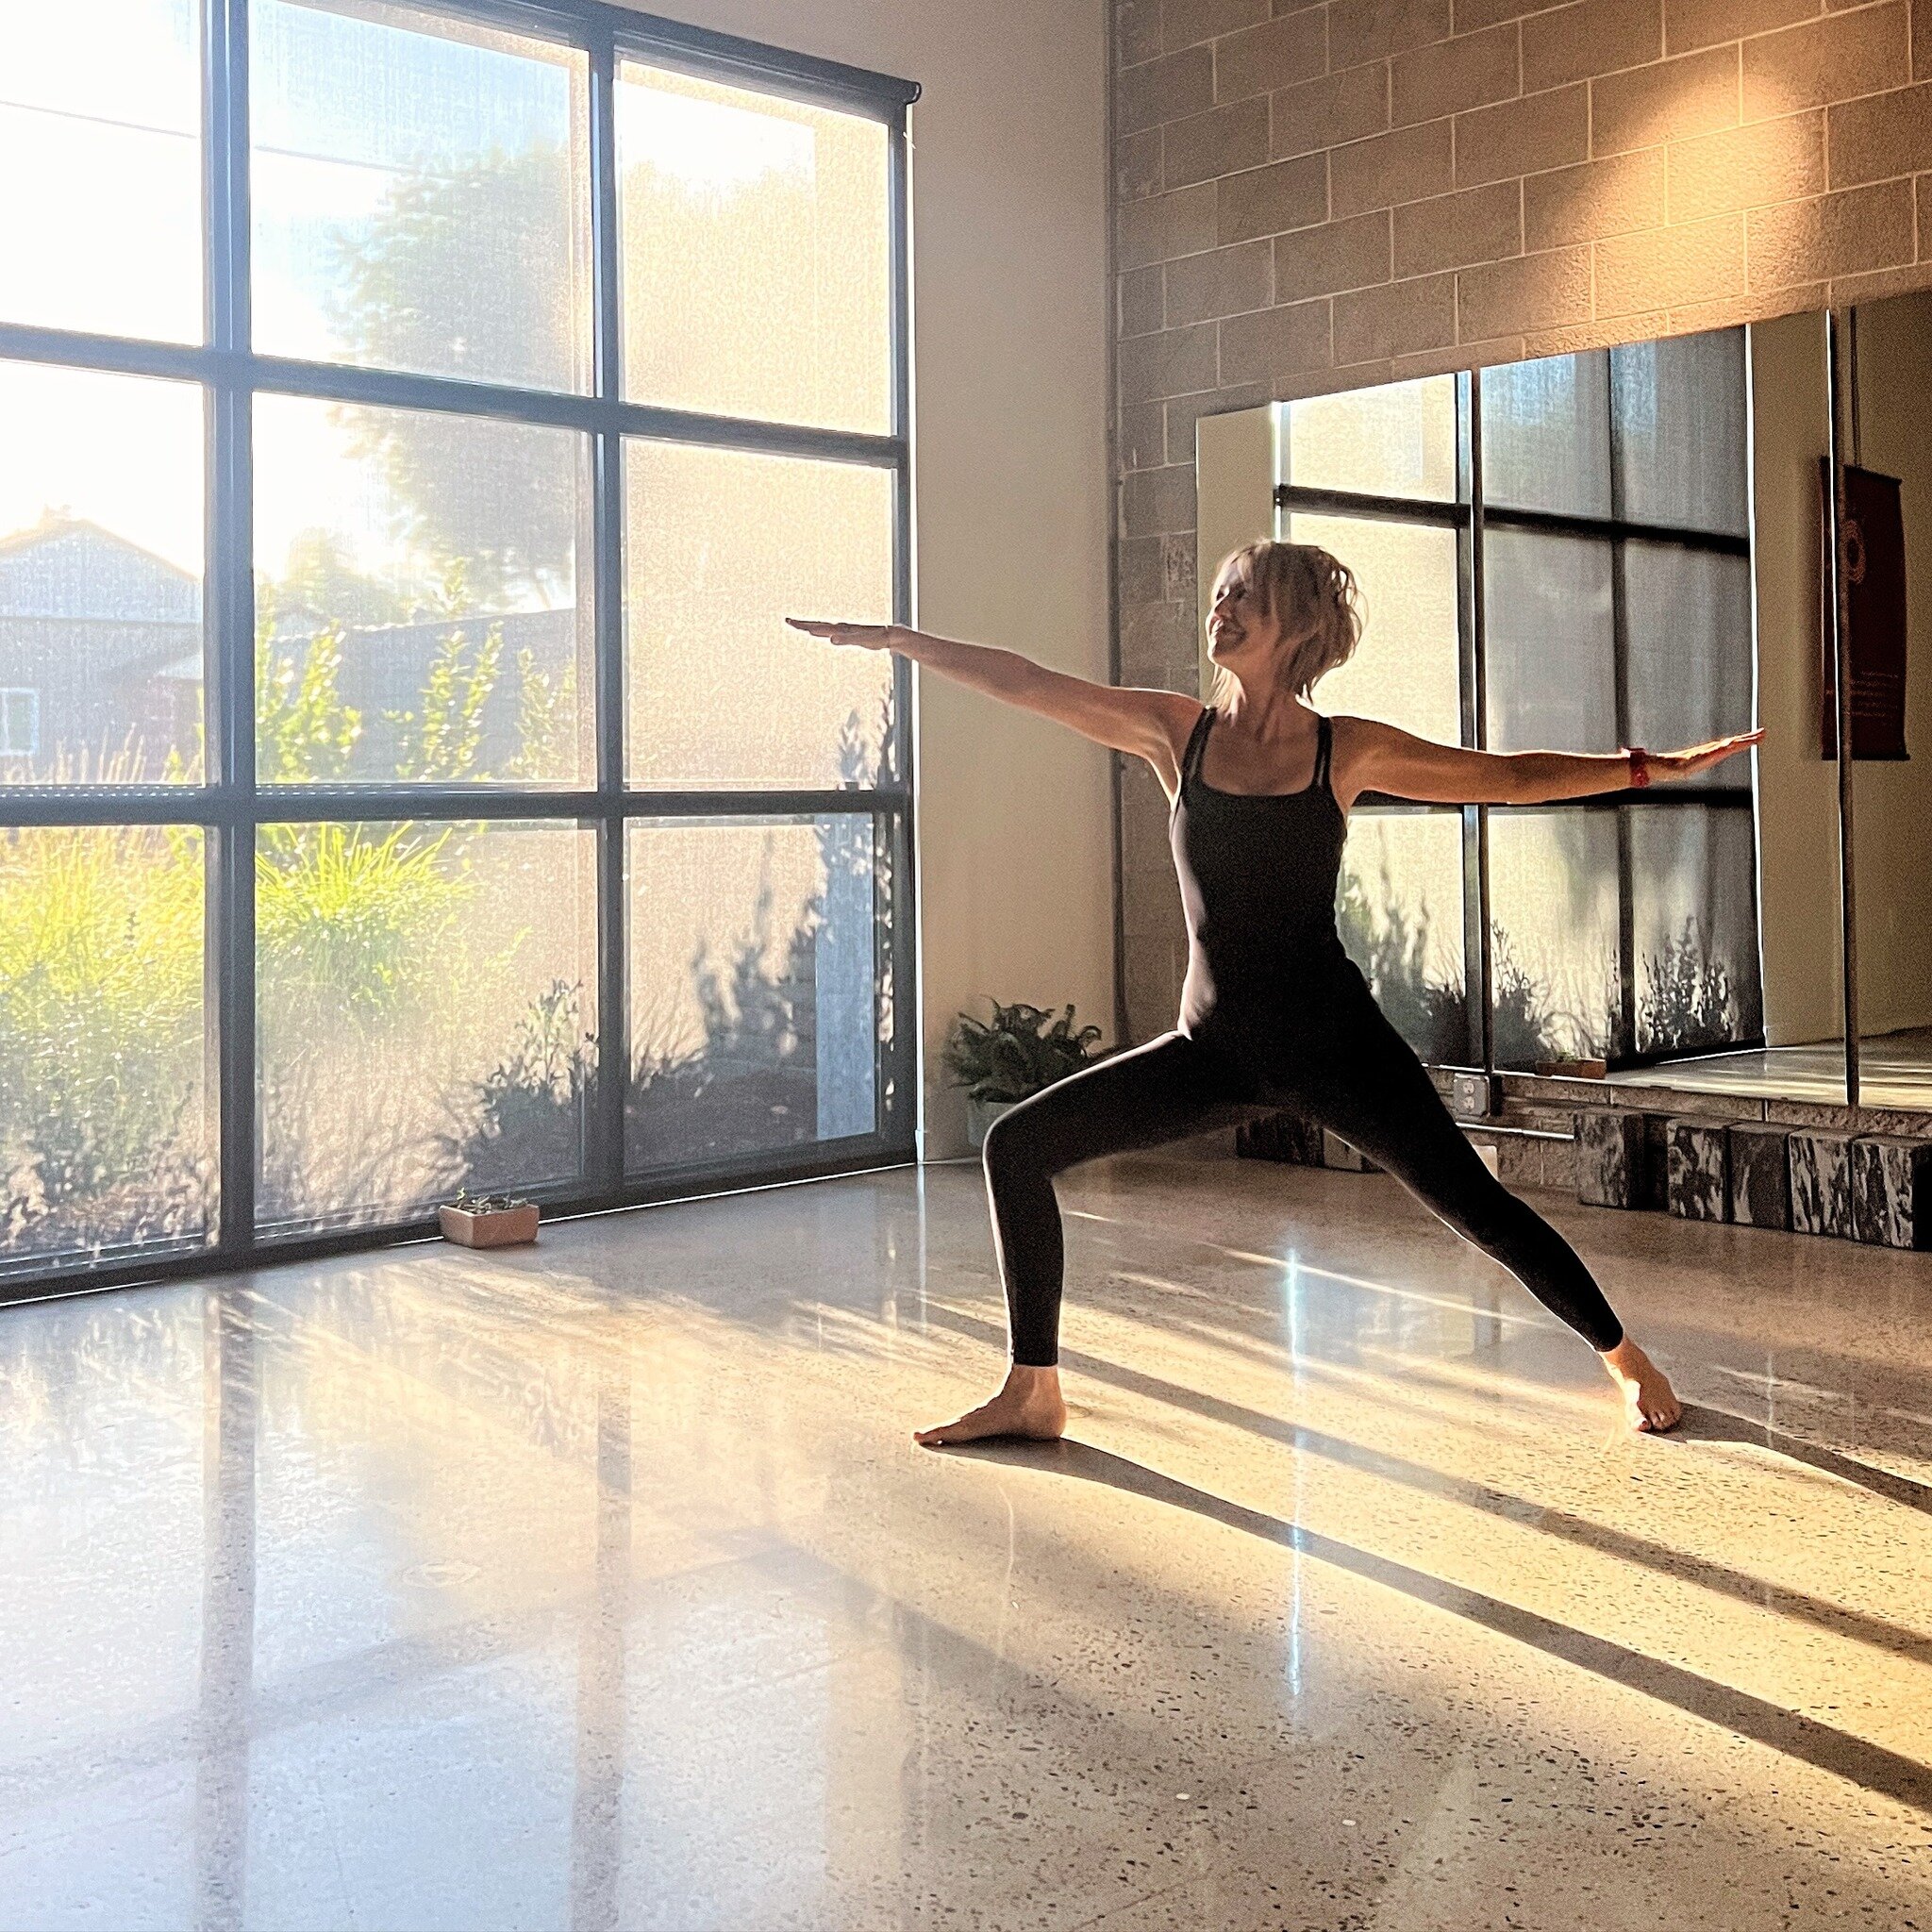 Crave Yoga: A Modern, Welcoming Studio For All – Palo Alto Daily Post